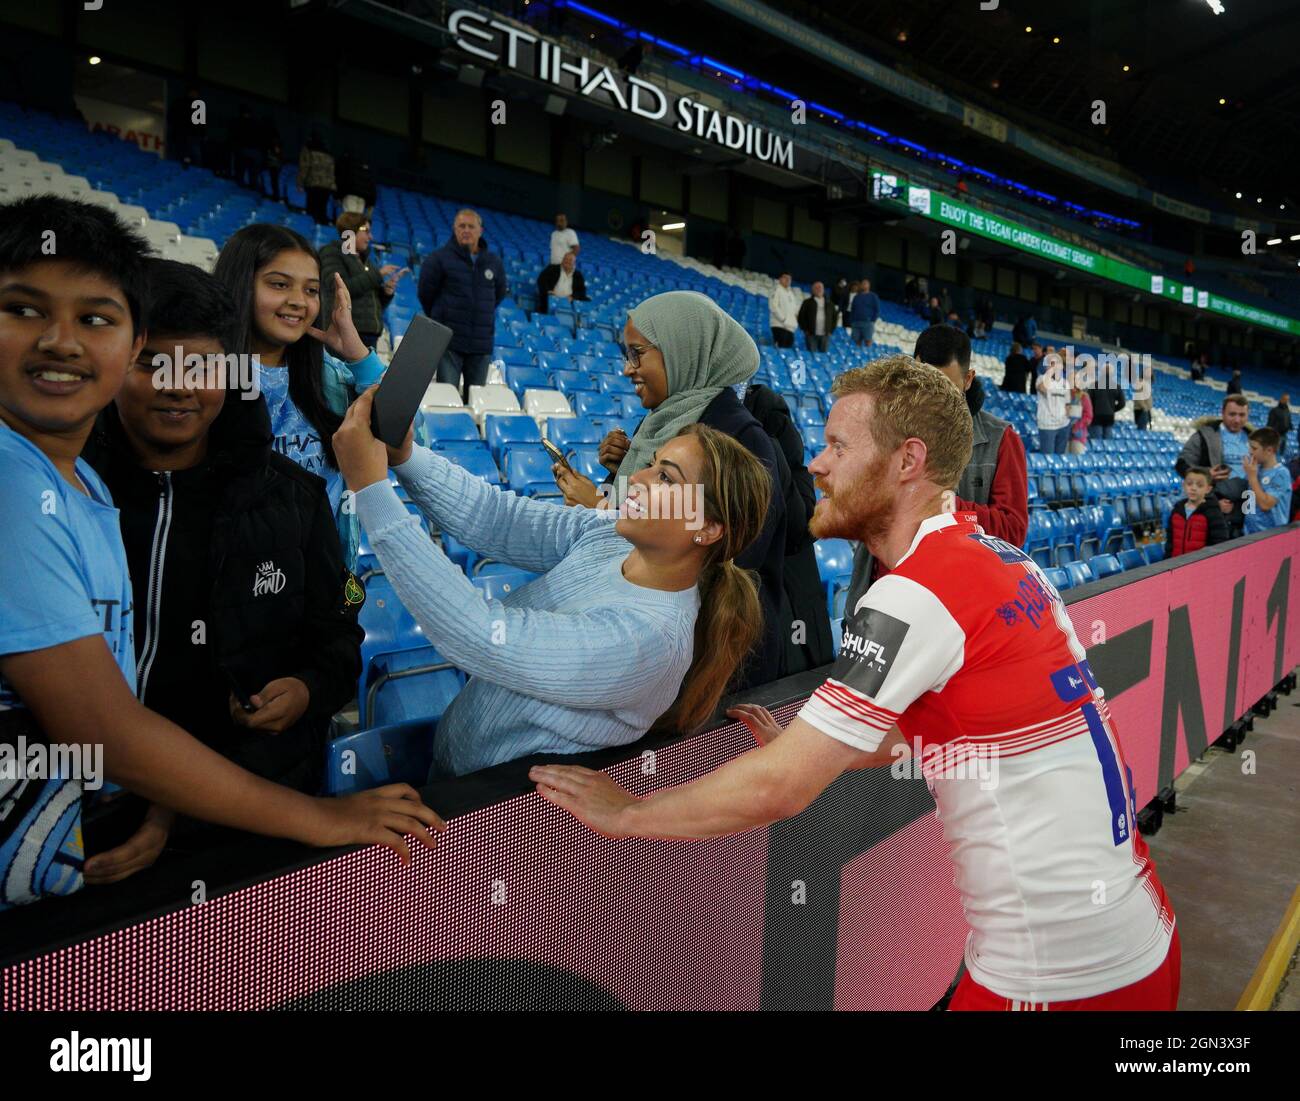 Manchester, UK. 21st Sep, 2021. Daryl Horgan of Wycombe Wanderers poses for photos with Man City supporters during the Carabao Cup match between Manchester City and Wycombe Wanderers at the Etihad Stadium, Manchester, England on 21 September 2021. Photo by Andy Rowland. Credit: PRiME Media Images/Alamy Live News Stock Photo